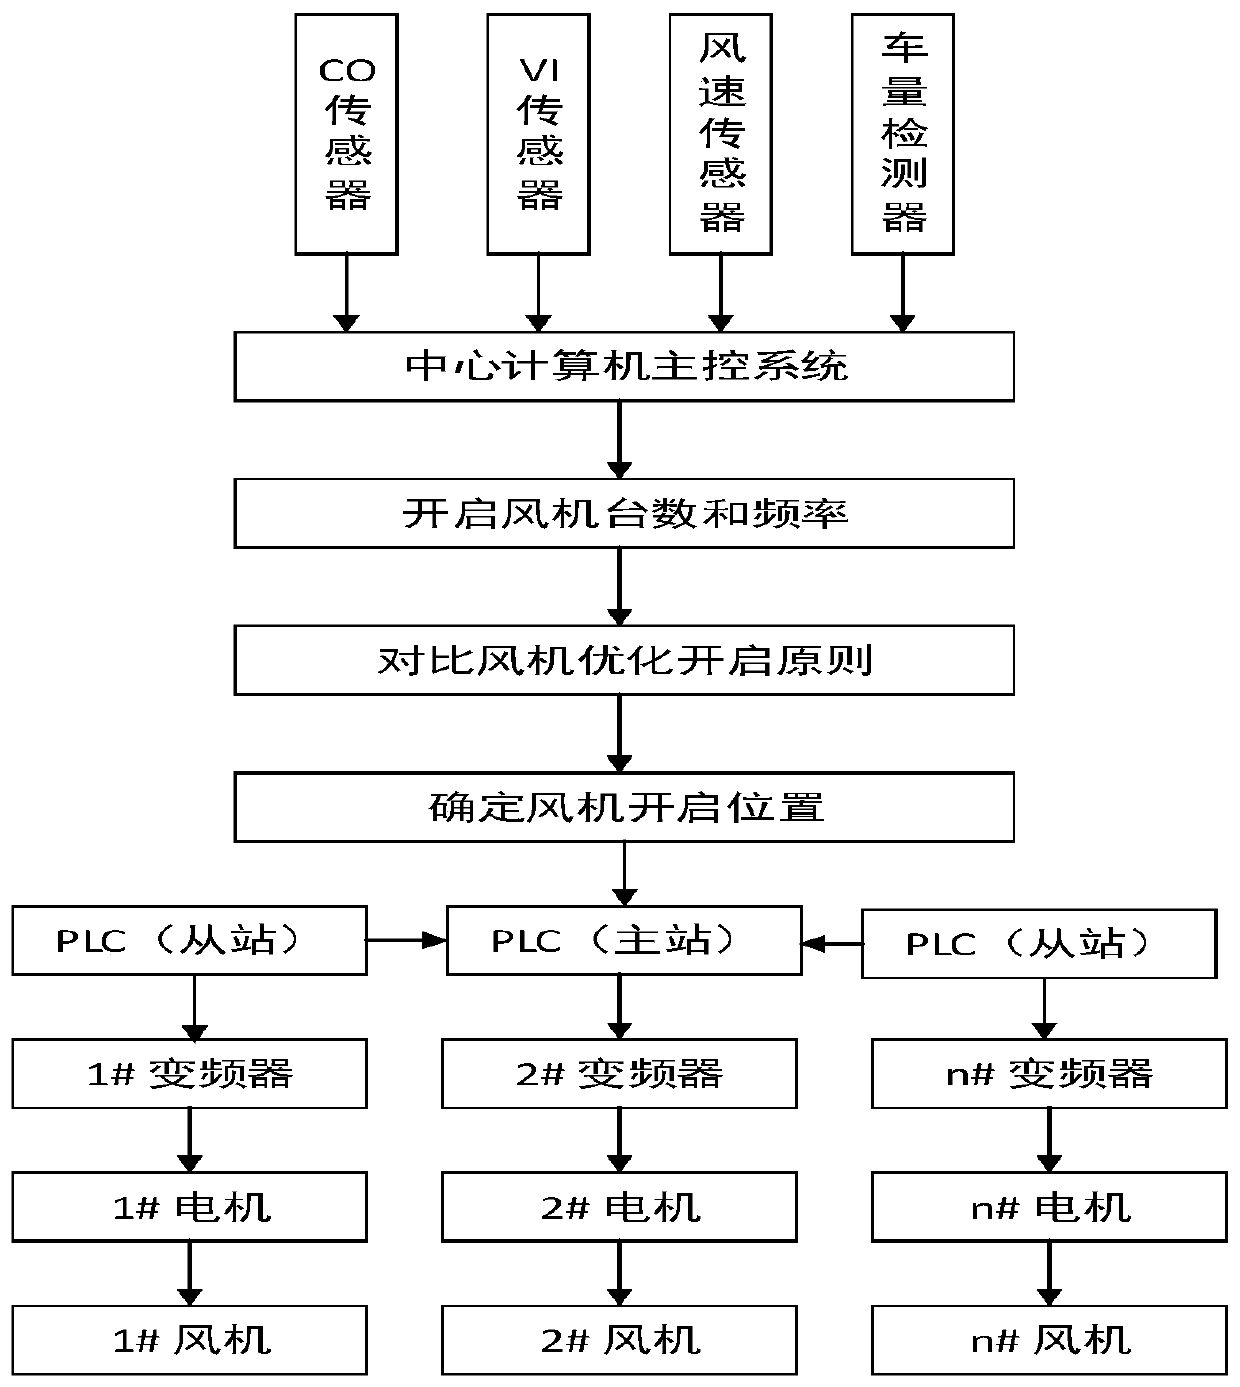 Large highway tunnel wind turbine group efficiency optimization control system and large highway tunnel wind turbine group efficiency optimization control method